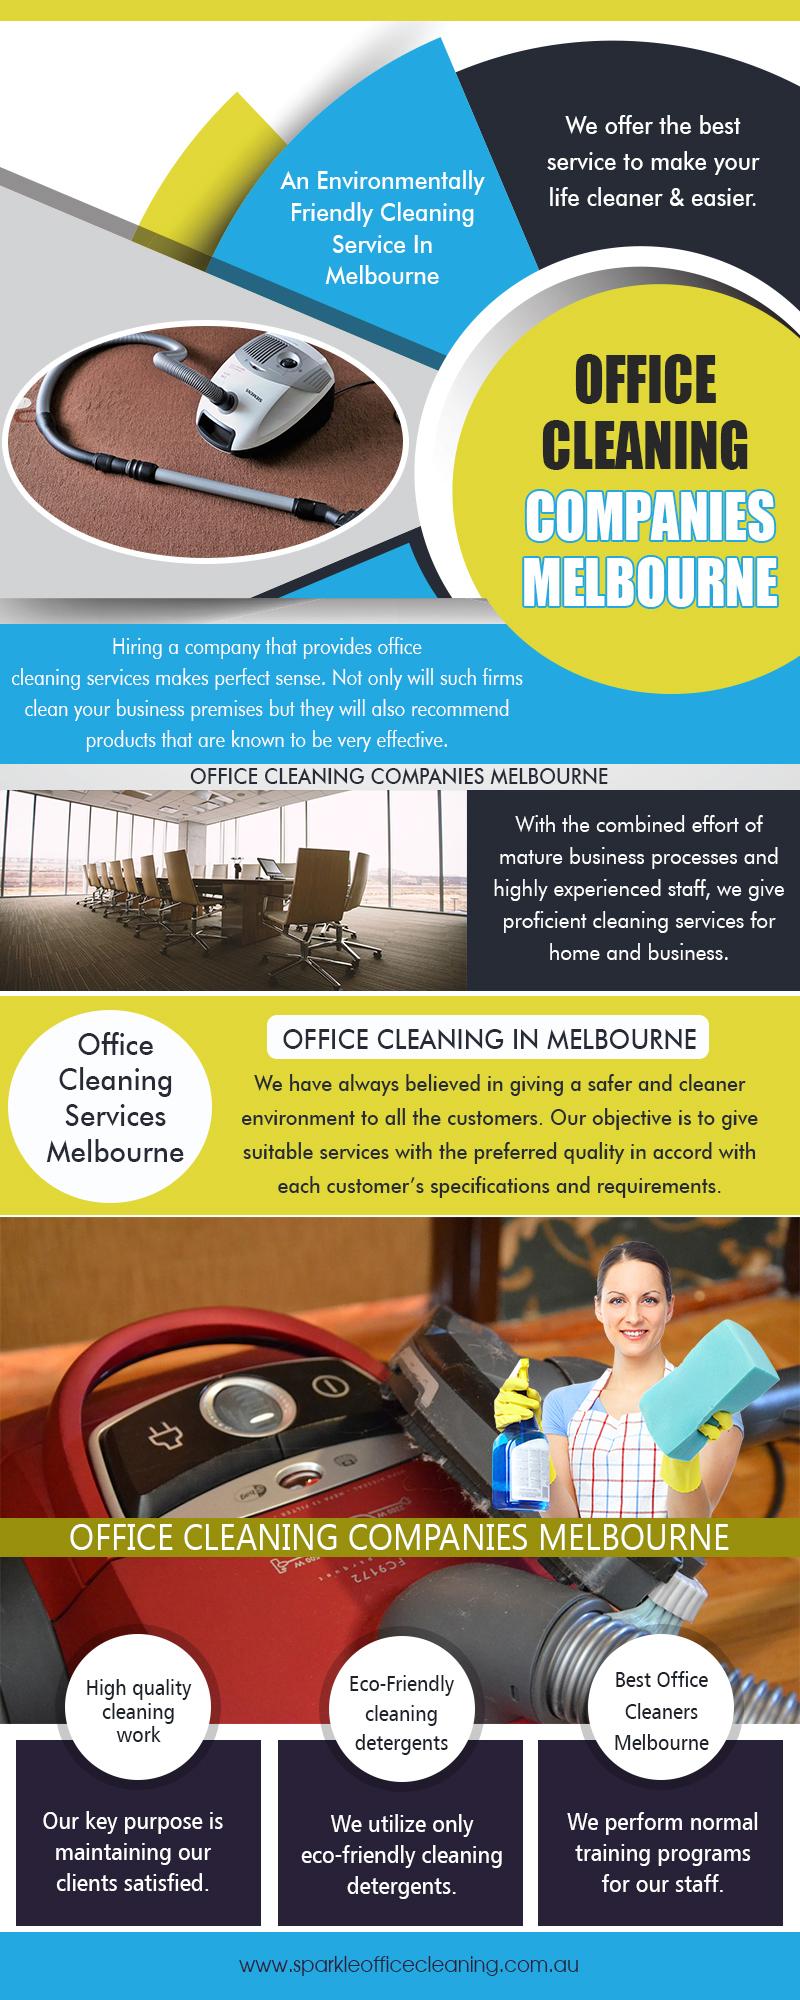 Office Cleaning Companies Melbourne | sparkleofficecleaning.com.au